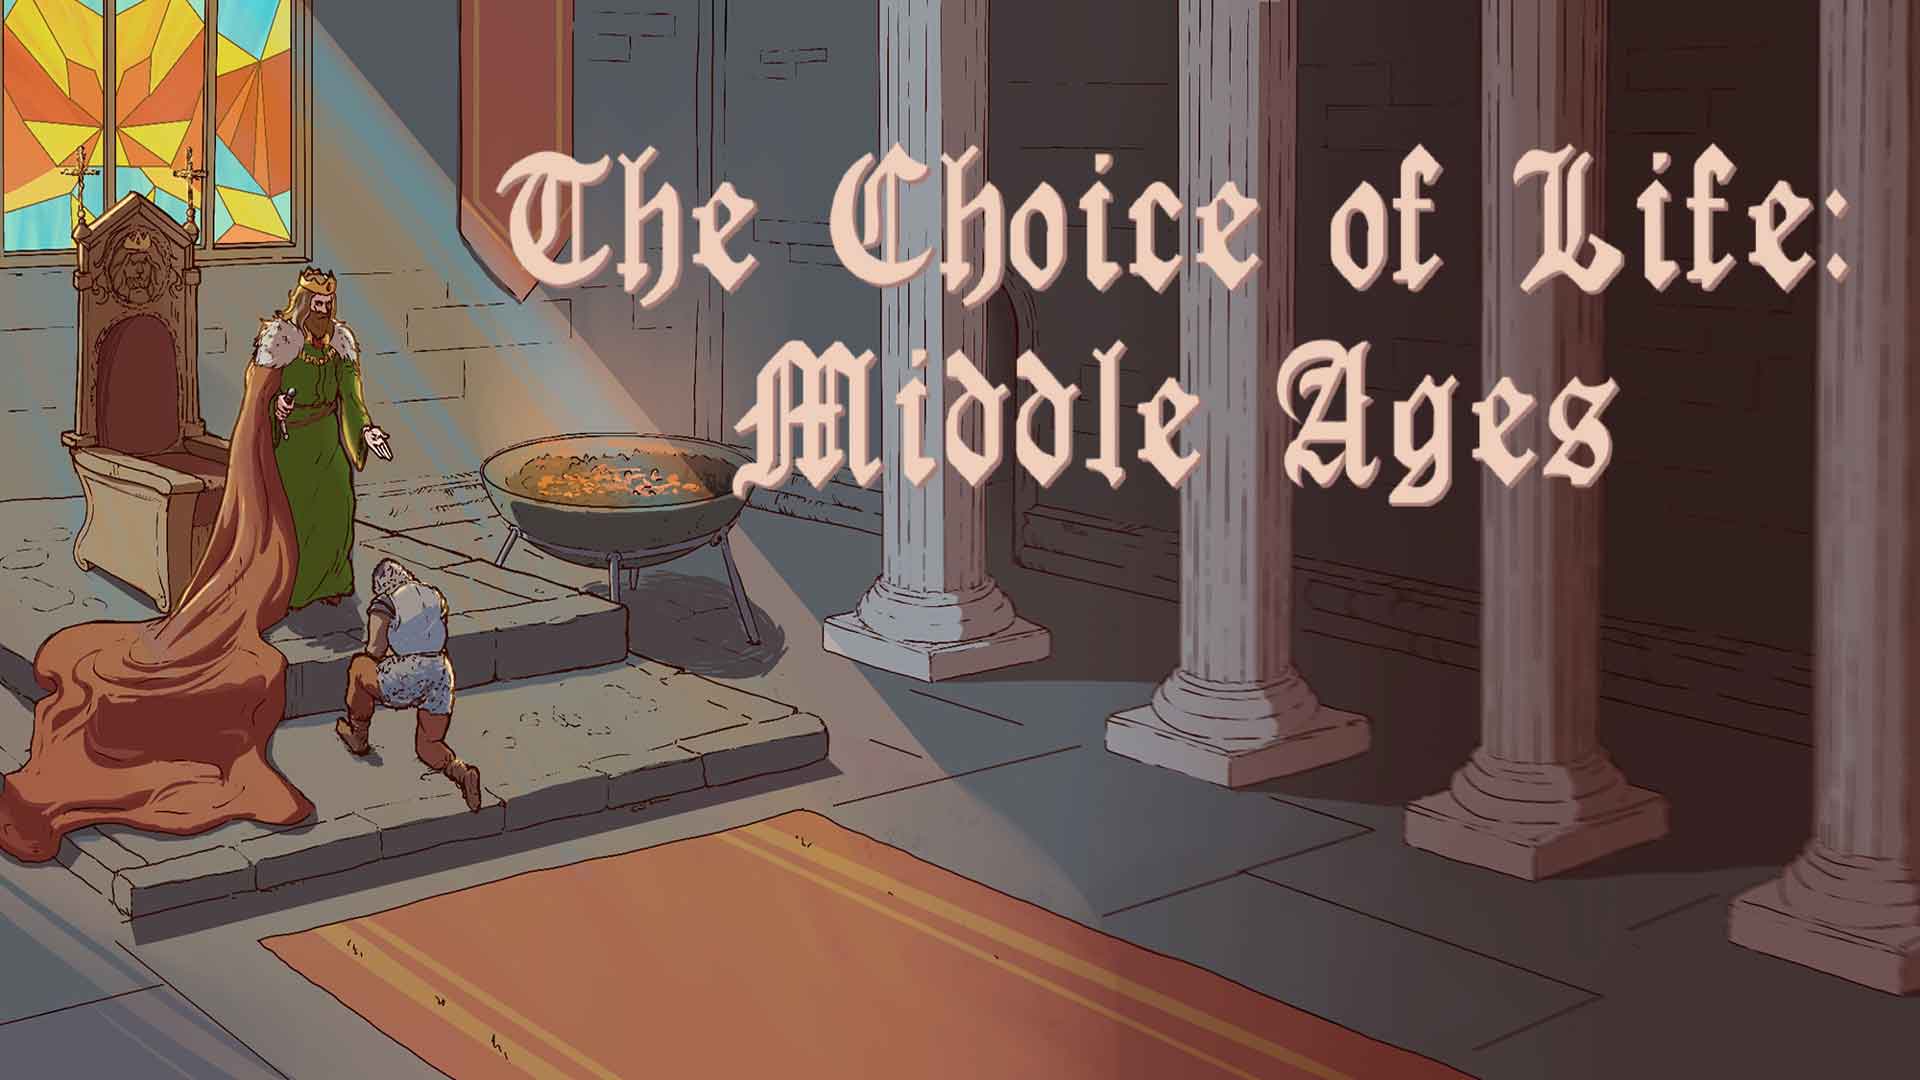 Choice of life игра. The choice of Life Middle ages игра. The choice of Life Middle ages концовки. Choice of Life. Игра choice of Life Middle ages 2.